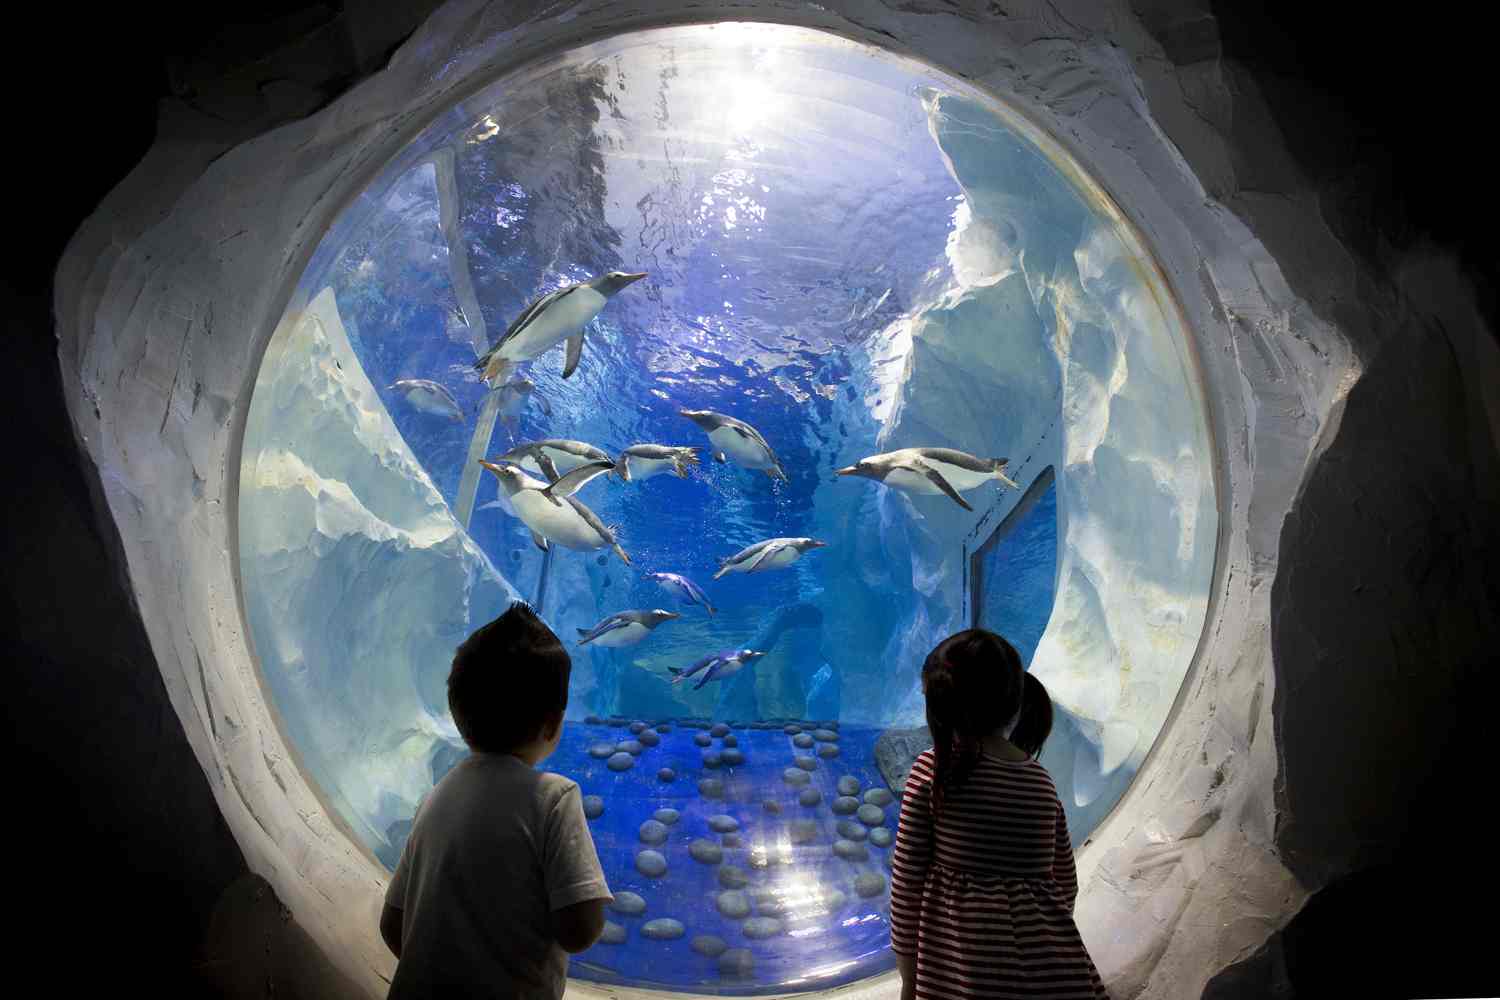 1581298723 949 Top 4 activities at the National Marine Life Center Birmingham - Top 4 activities at the National Marine Life Center Birmingham England